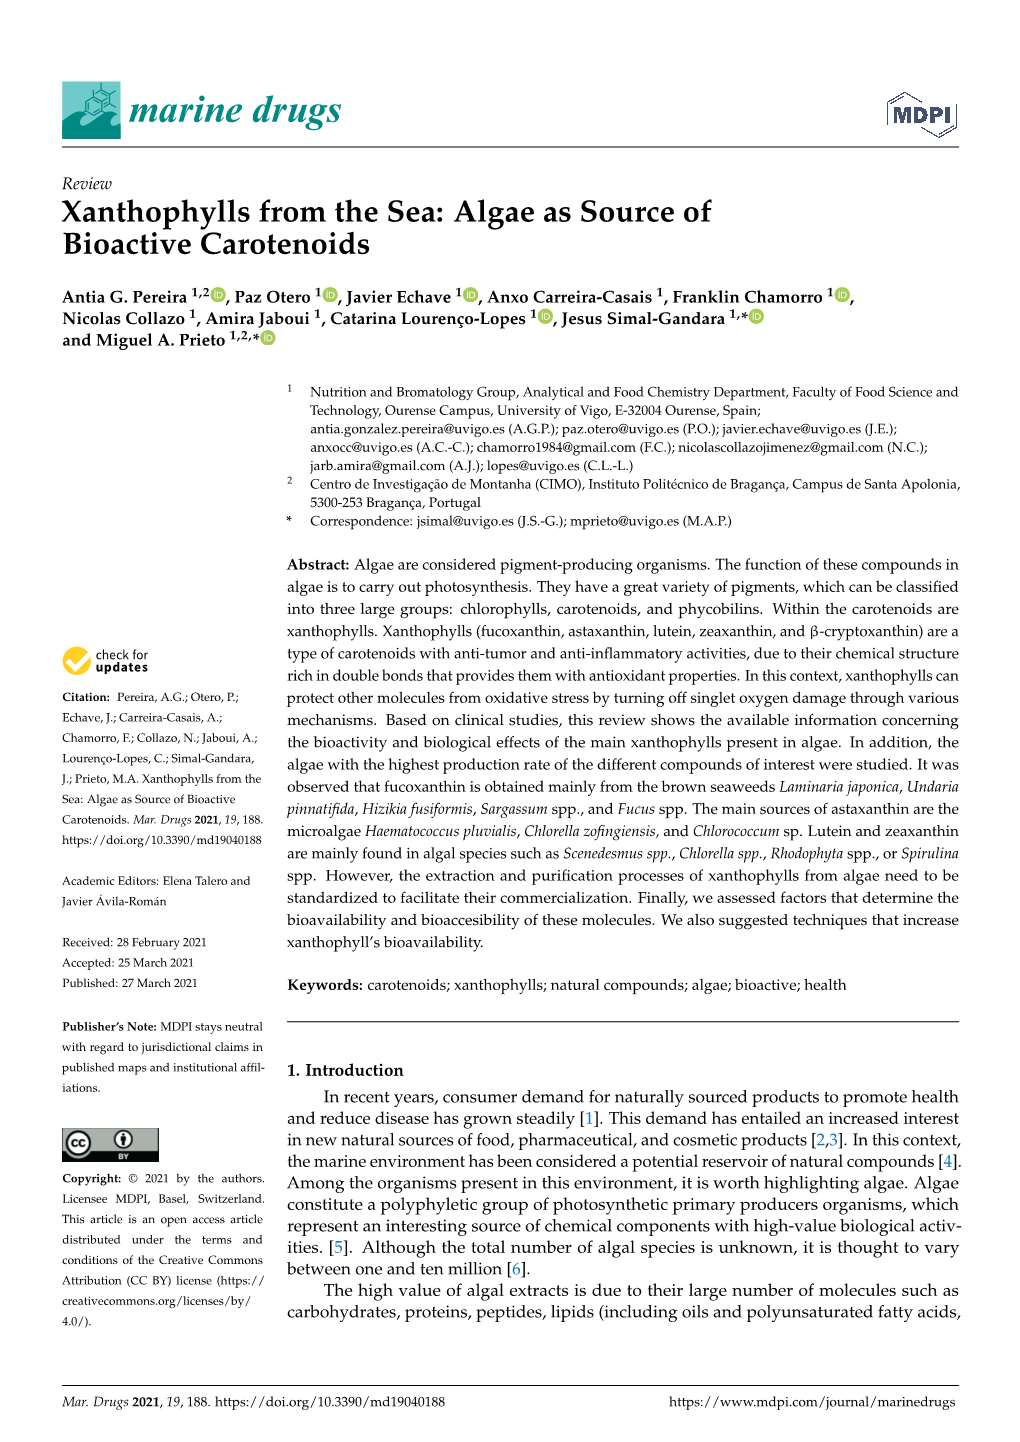 Xanthophylls from the Sea: Algae As Source of Bioactive Carotenoids